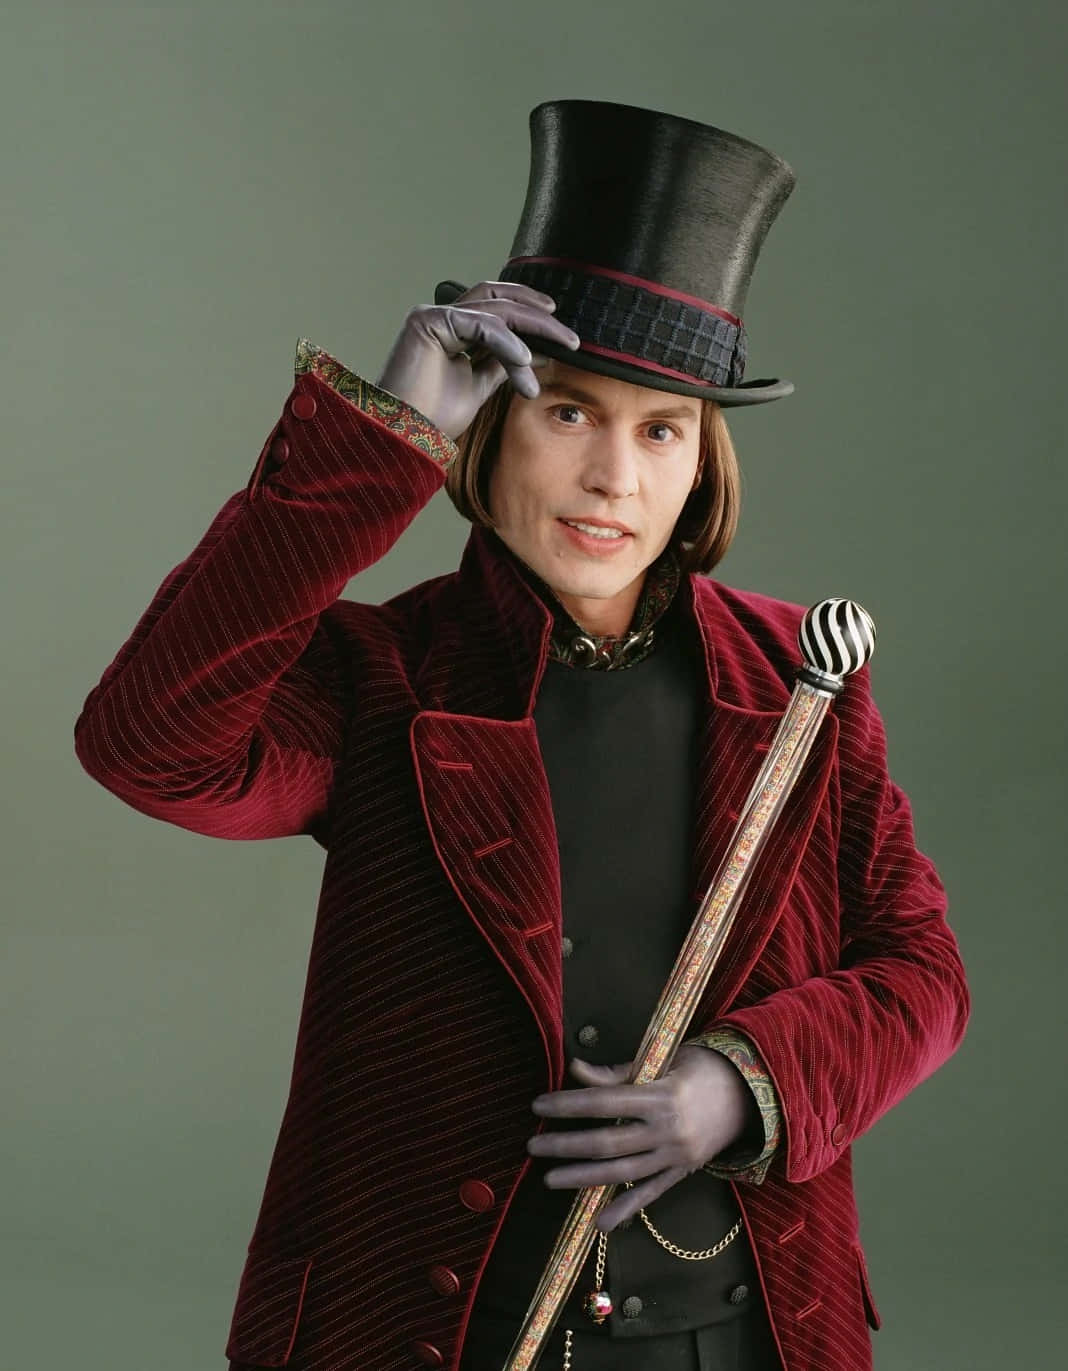 "A Classic Picture of Willy Wonka"